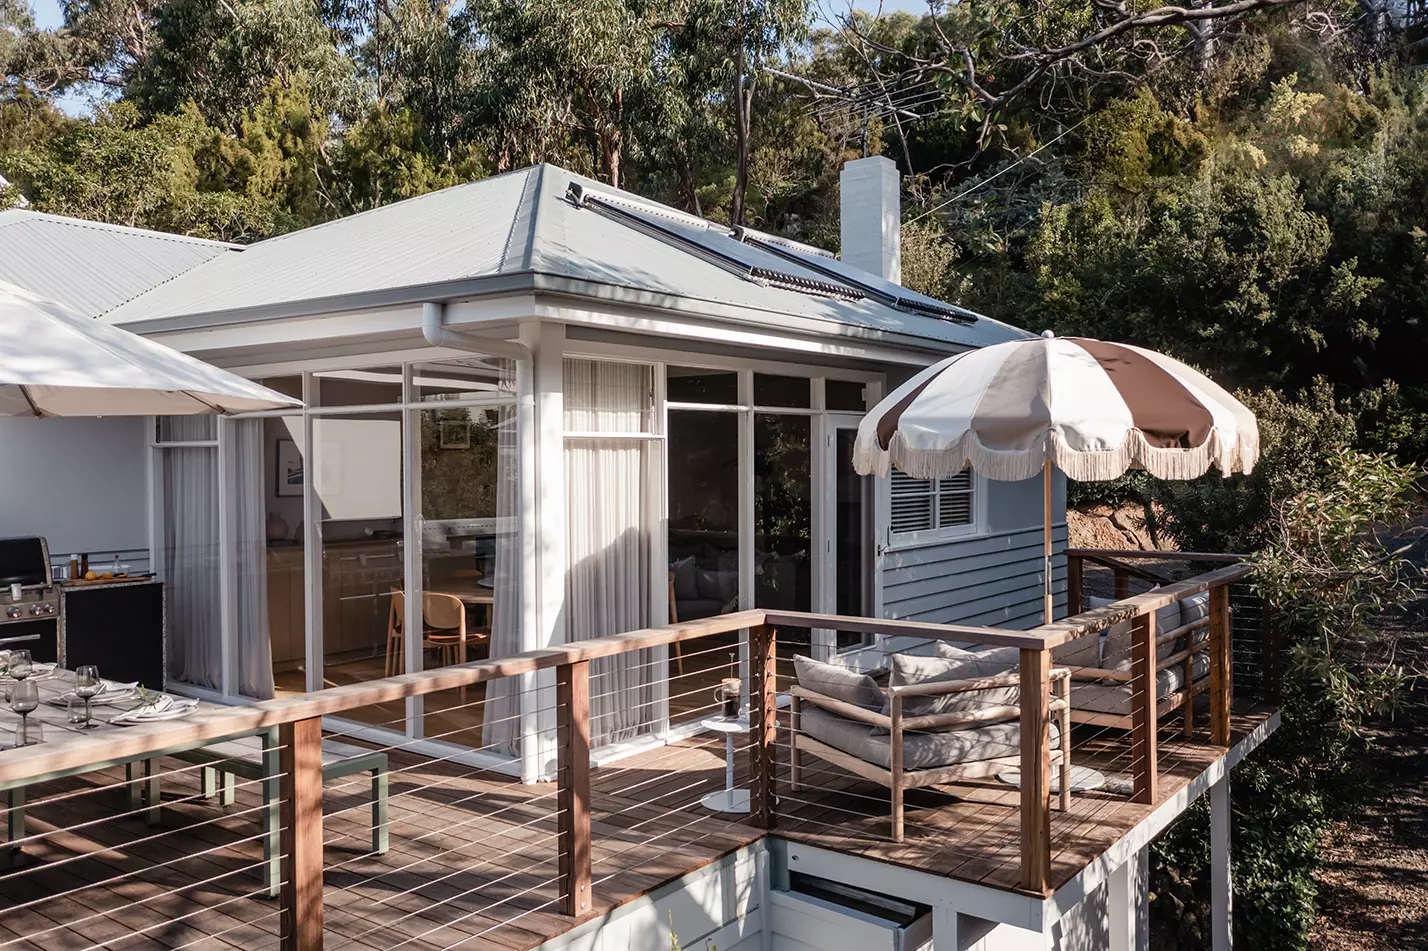 Exterior-Hunting-for-George-Reno-Goals-Lorne-Beach-House-DJI 0866